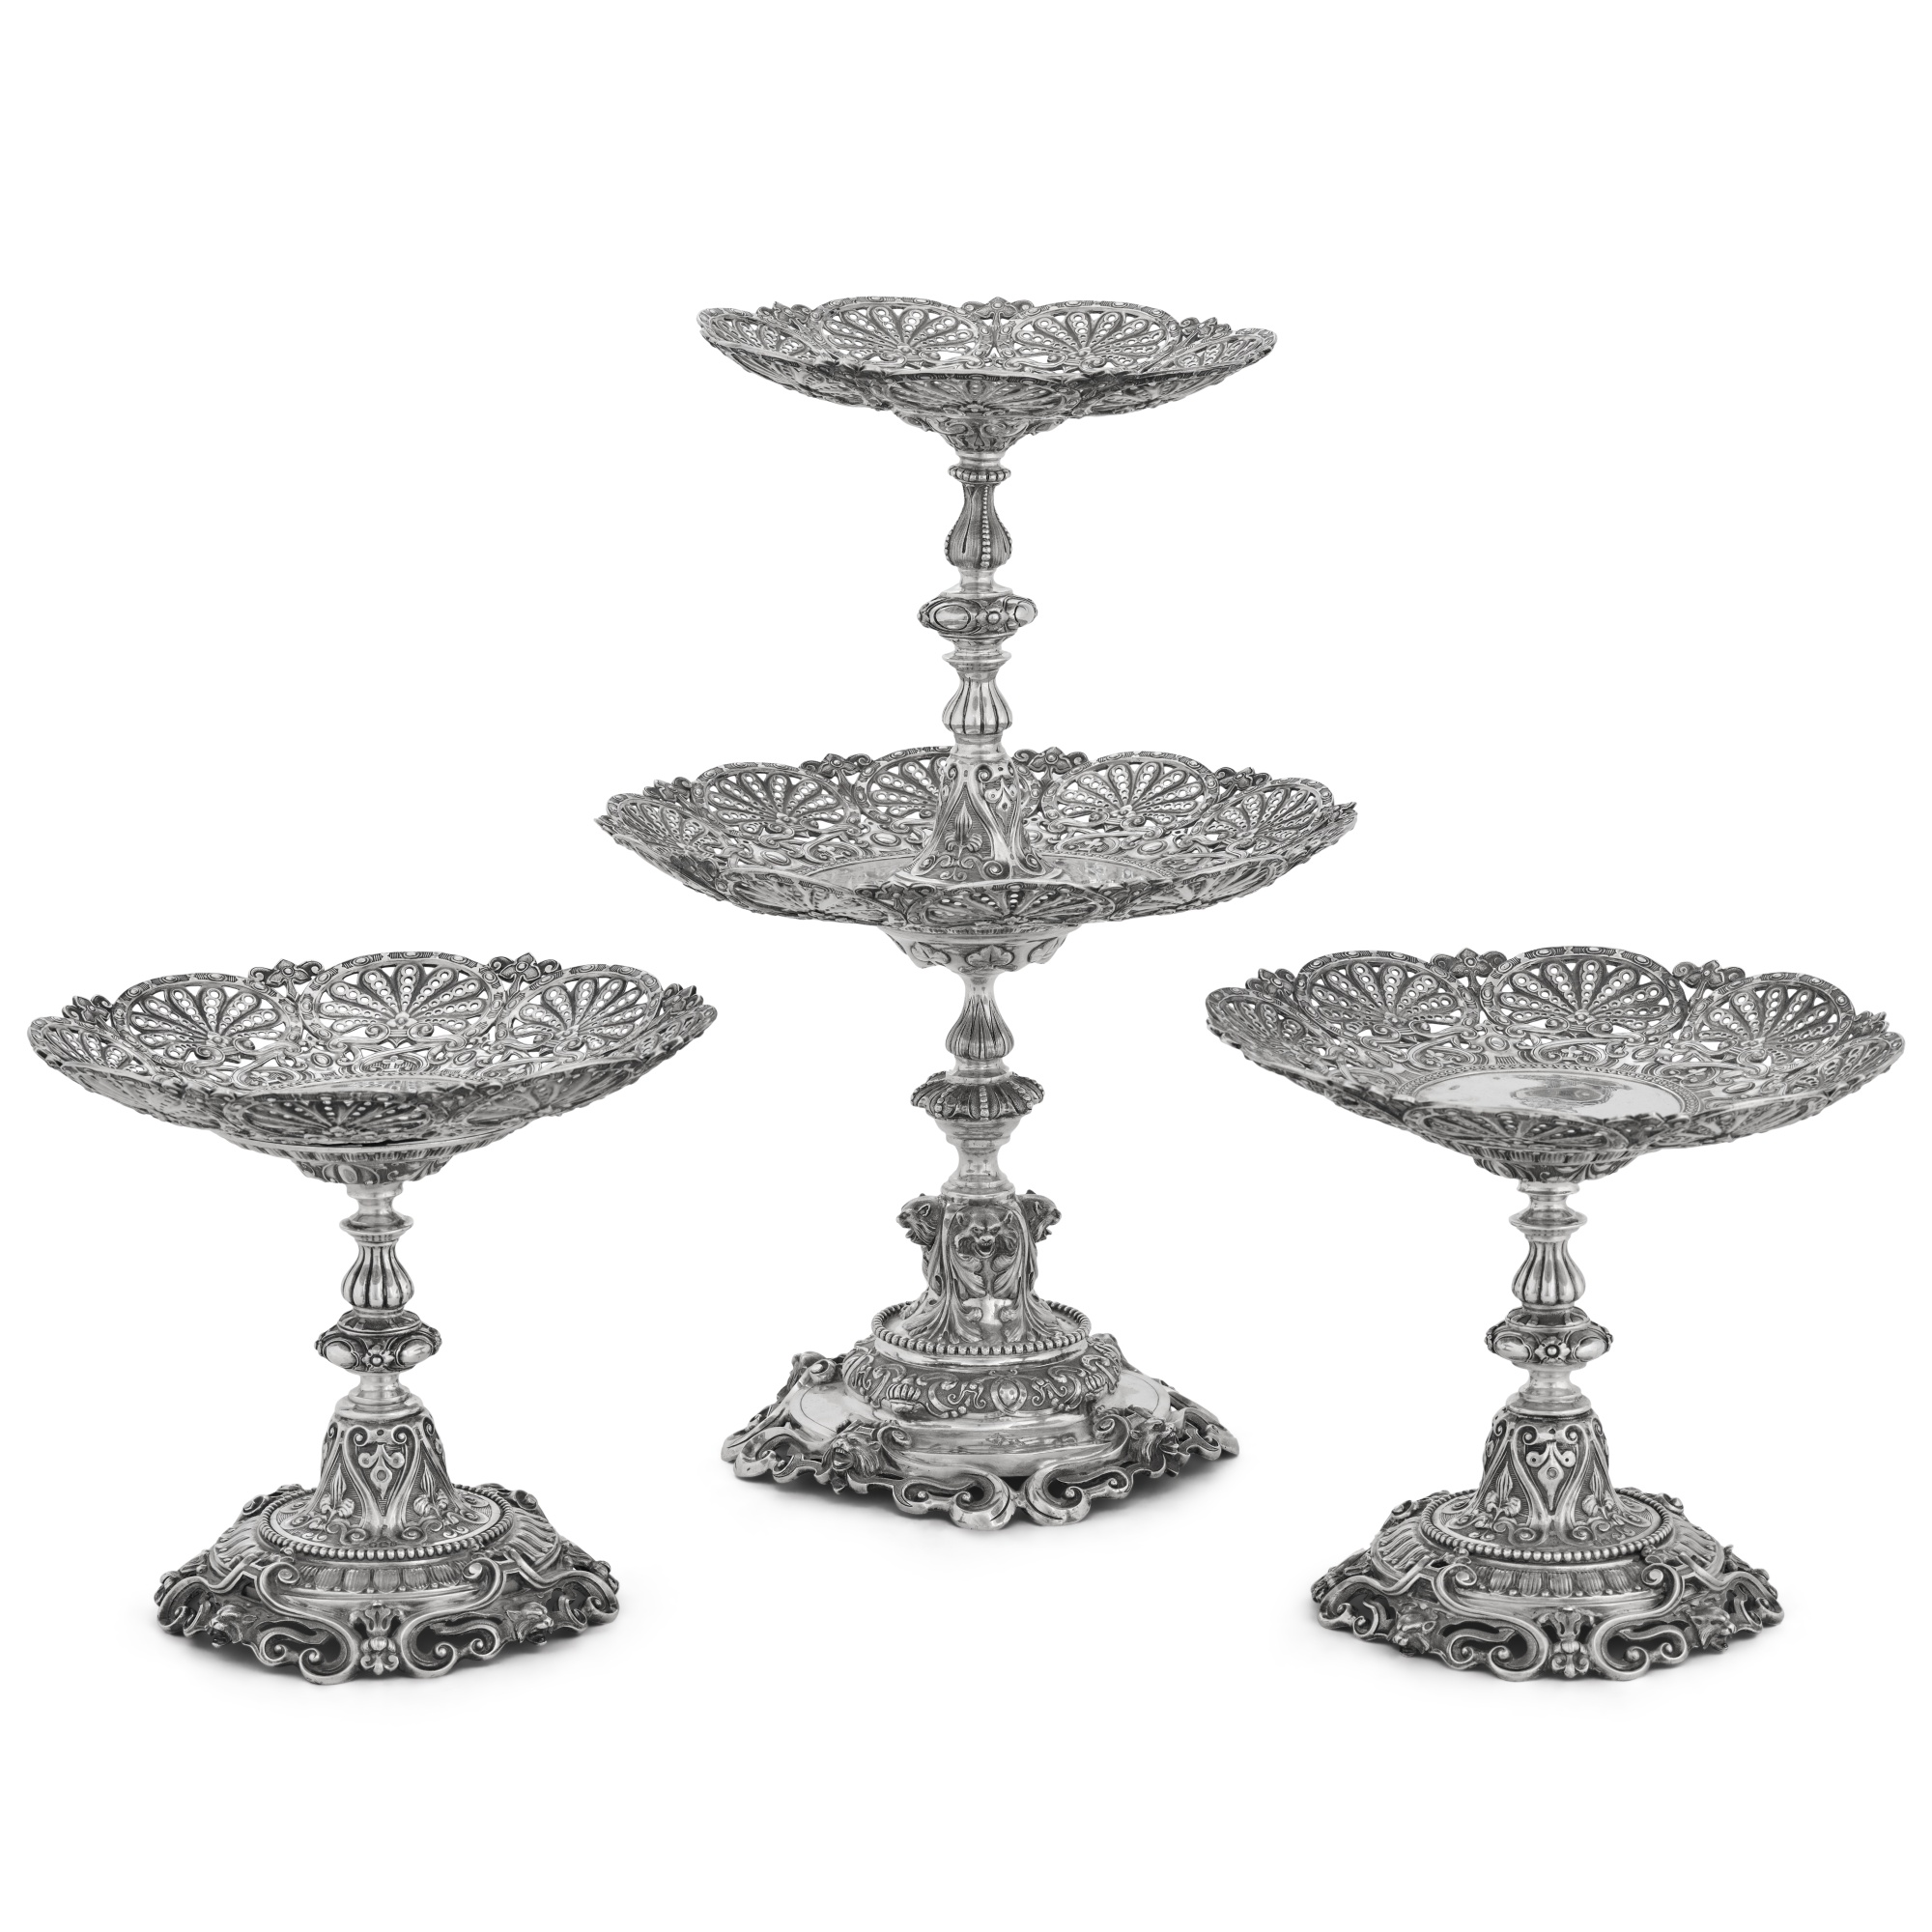 A suite of Victorian silver comports, Garrard & Co., London, 1862